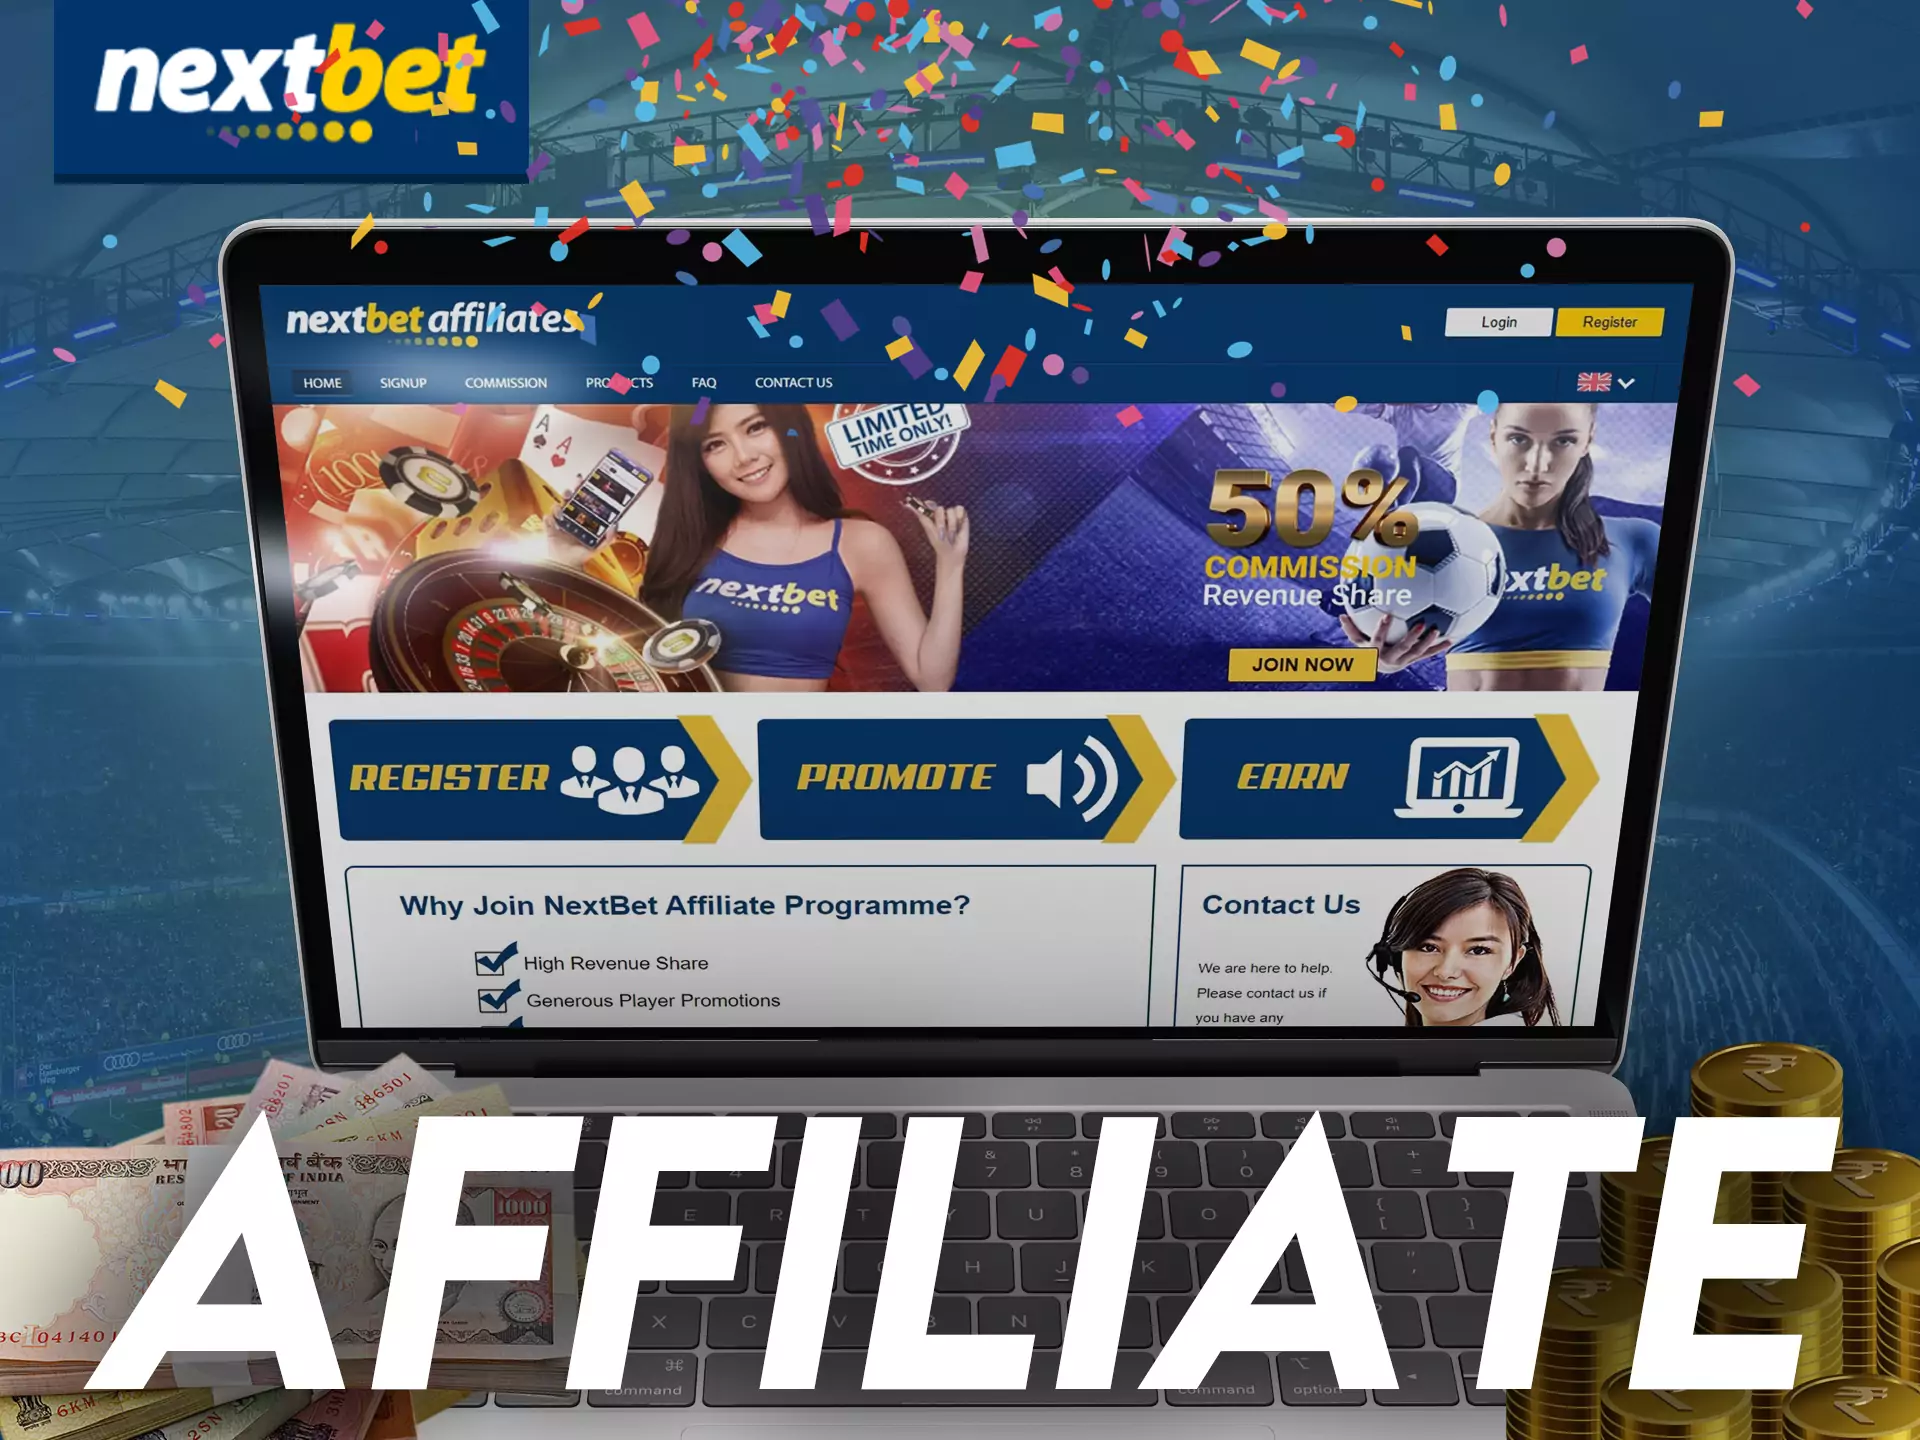 Nextbet offers to join a profitable affiliate program.